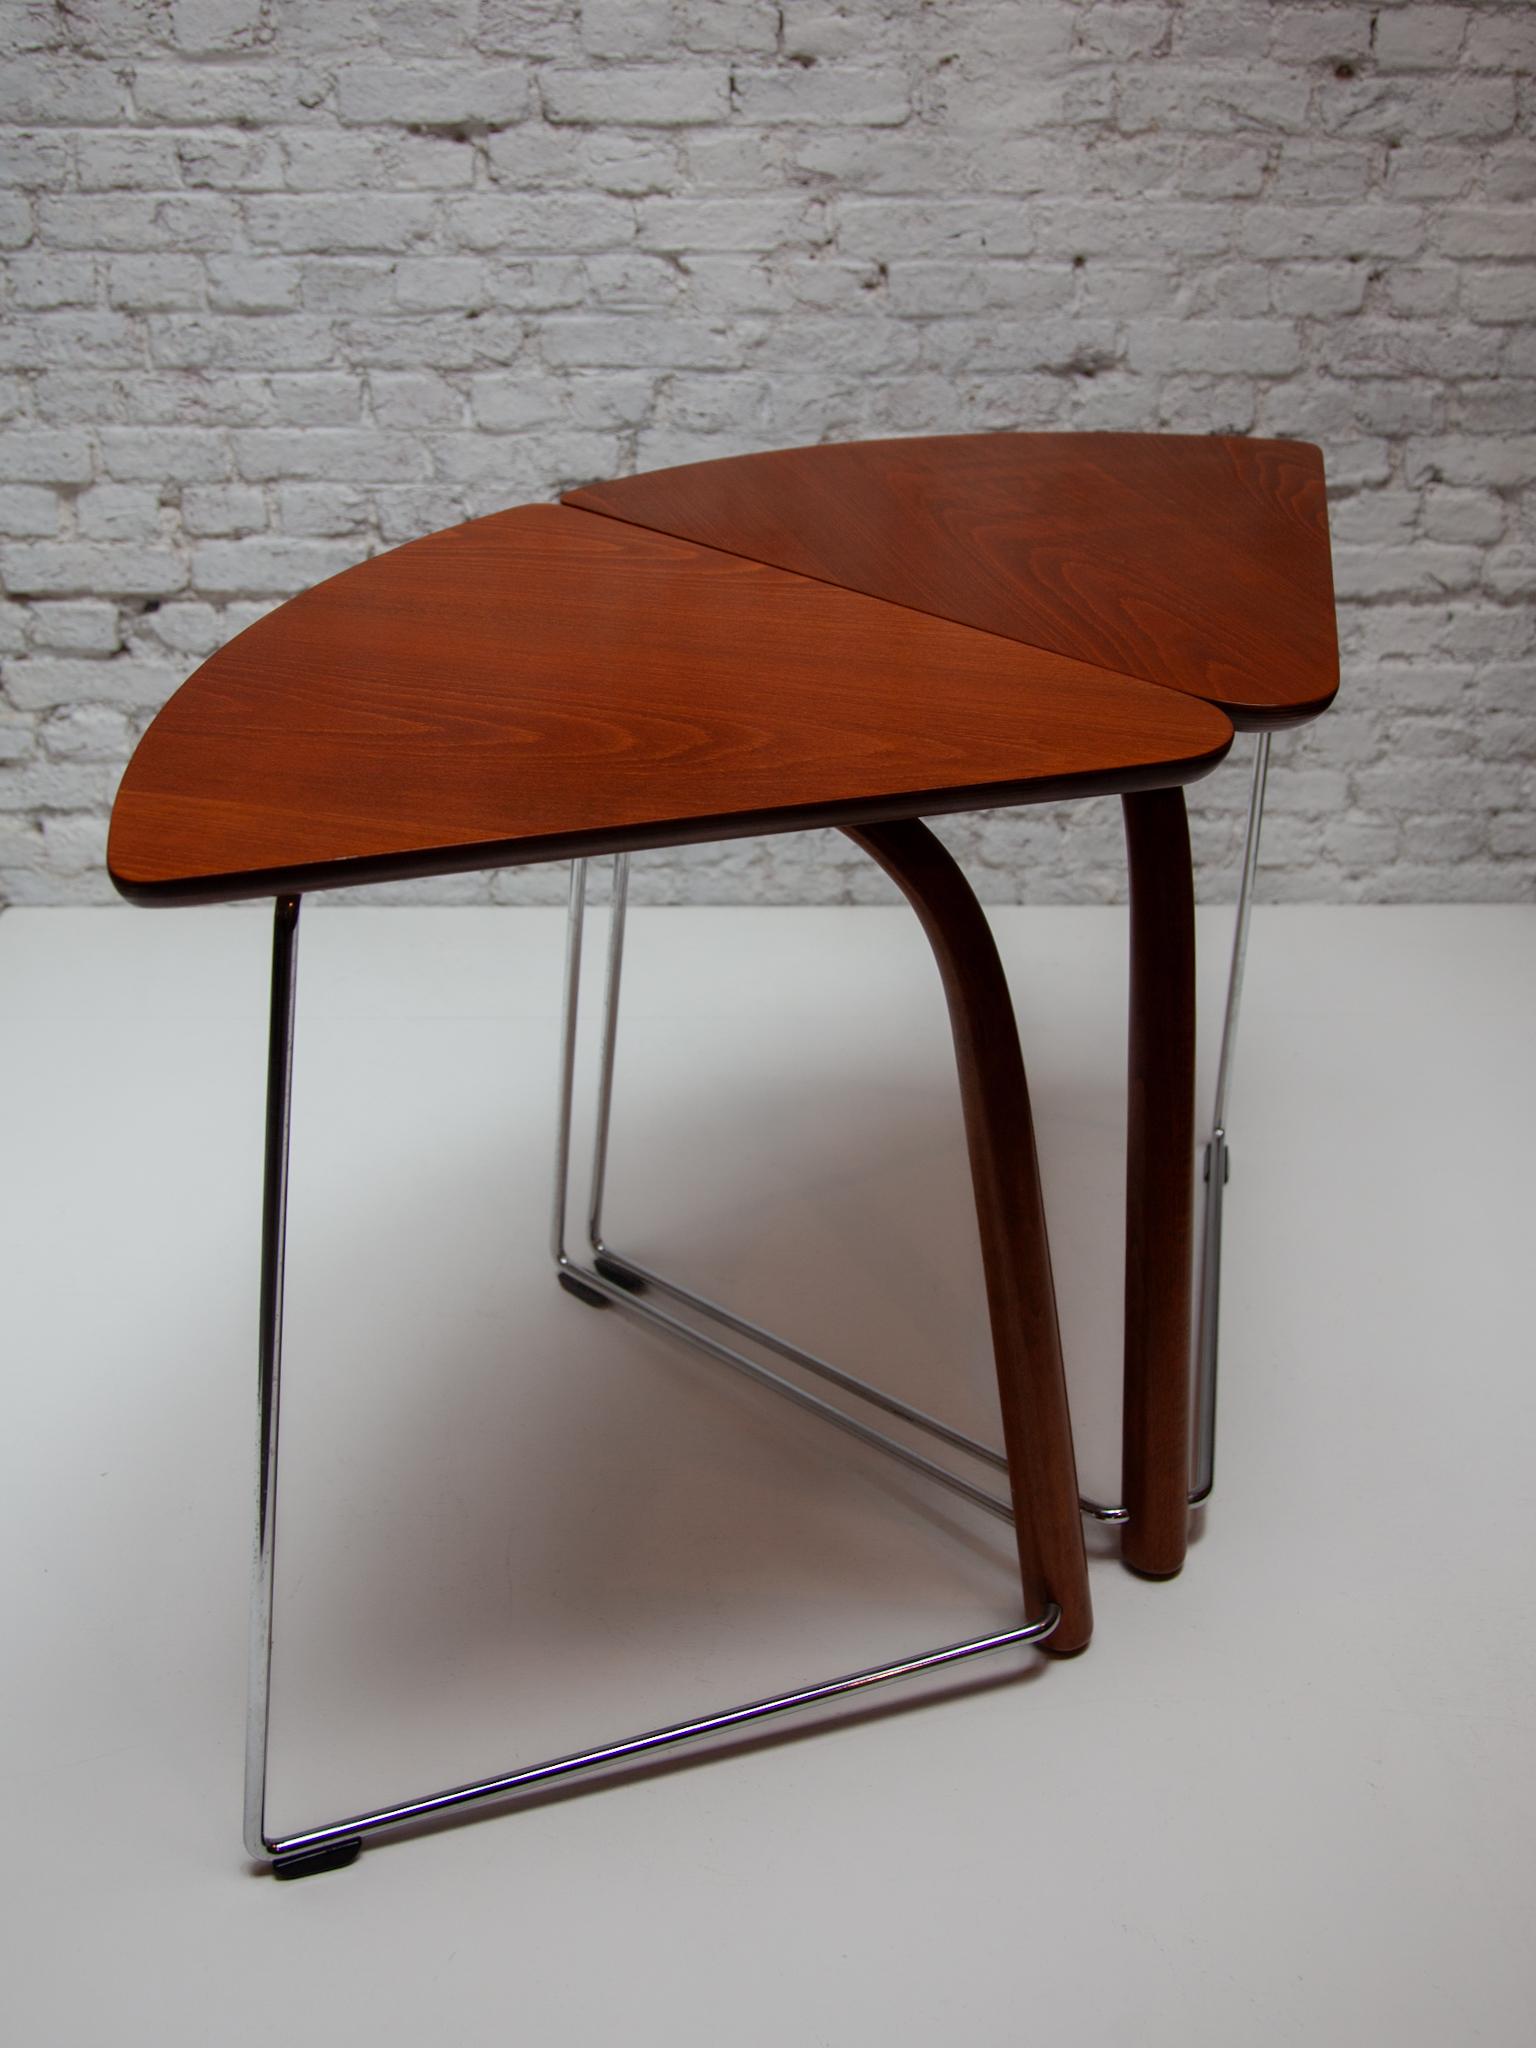 Set of Two Side Tables designed by Wulf Schneider and Ulrich Böhm, Thonet, 1980s For Sale 1